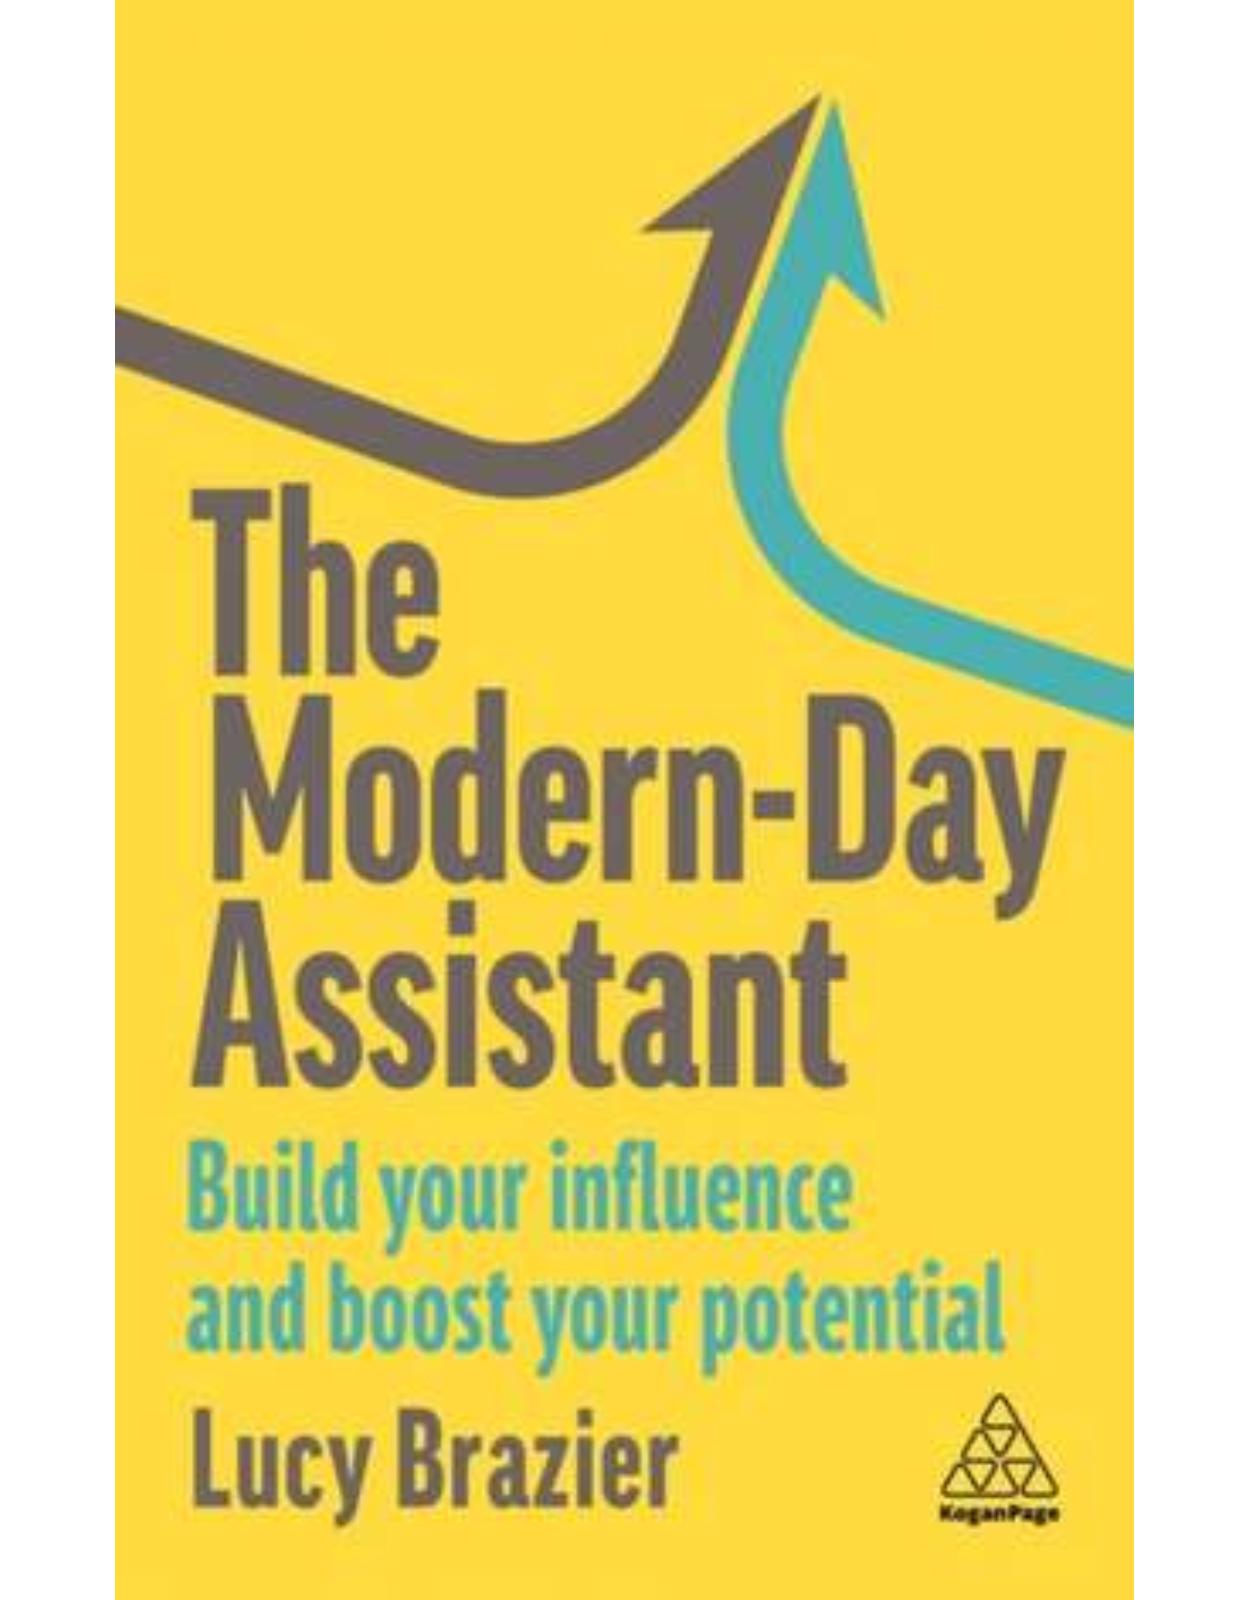 The Modern-Day Assistant